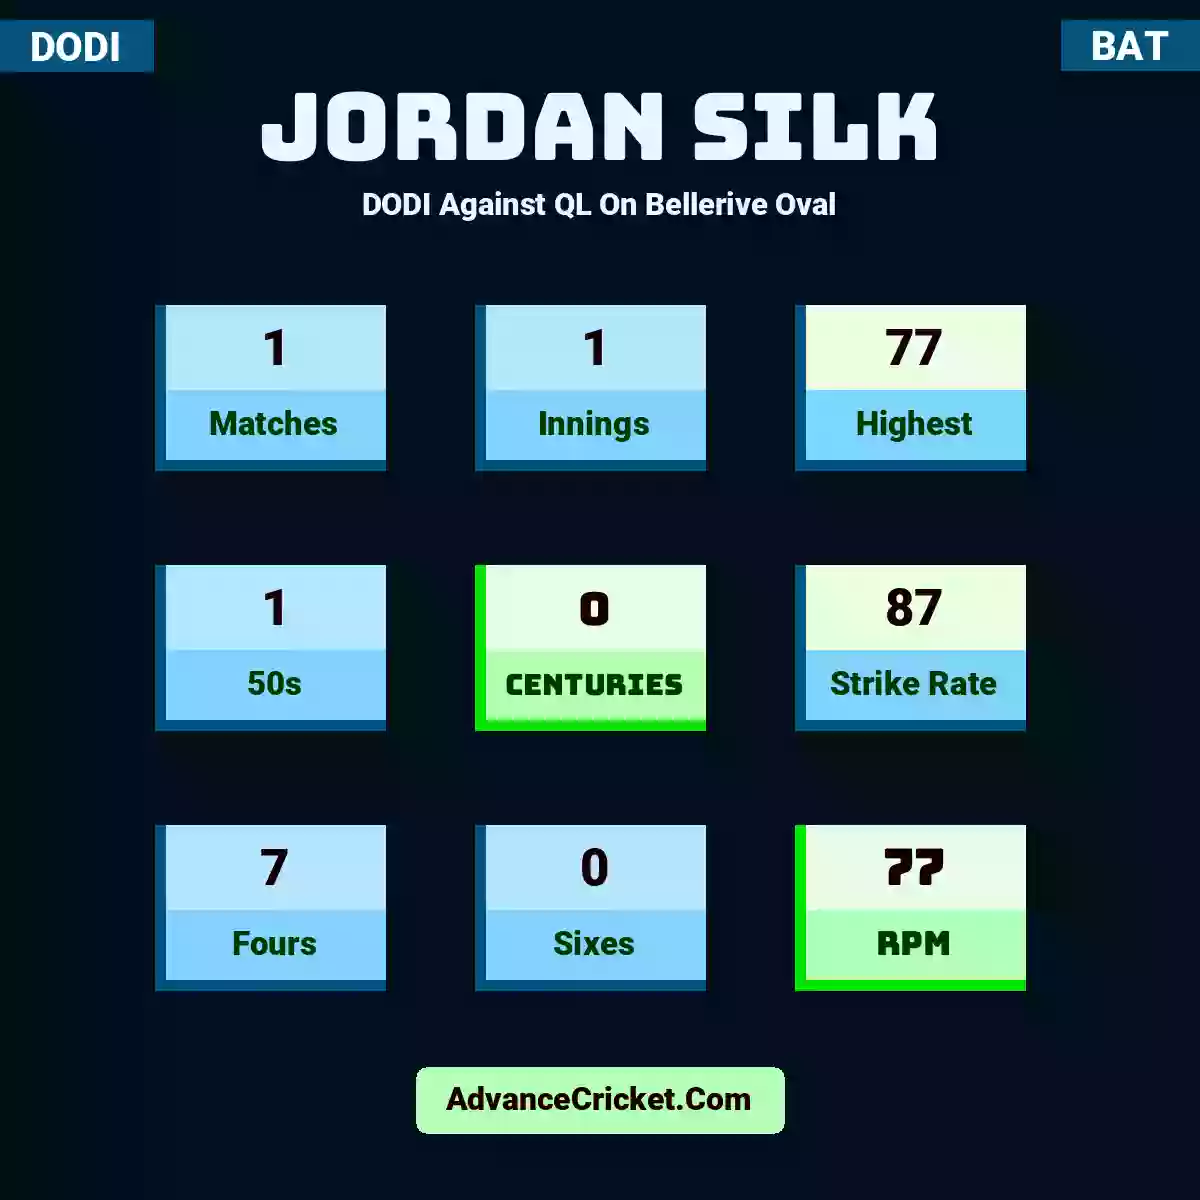 Jordan Silk DODI  Against QL On Bellerive Oval, Jordan Silk played 1 matches, scored 77 runs as highest, 1 half-centuries, and 0 centuries, with a strike rate of 87. J.Silk hit 7 fours and 0 sixes, with an RPM of 77.